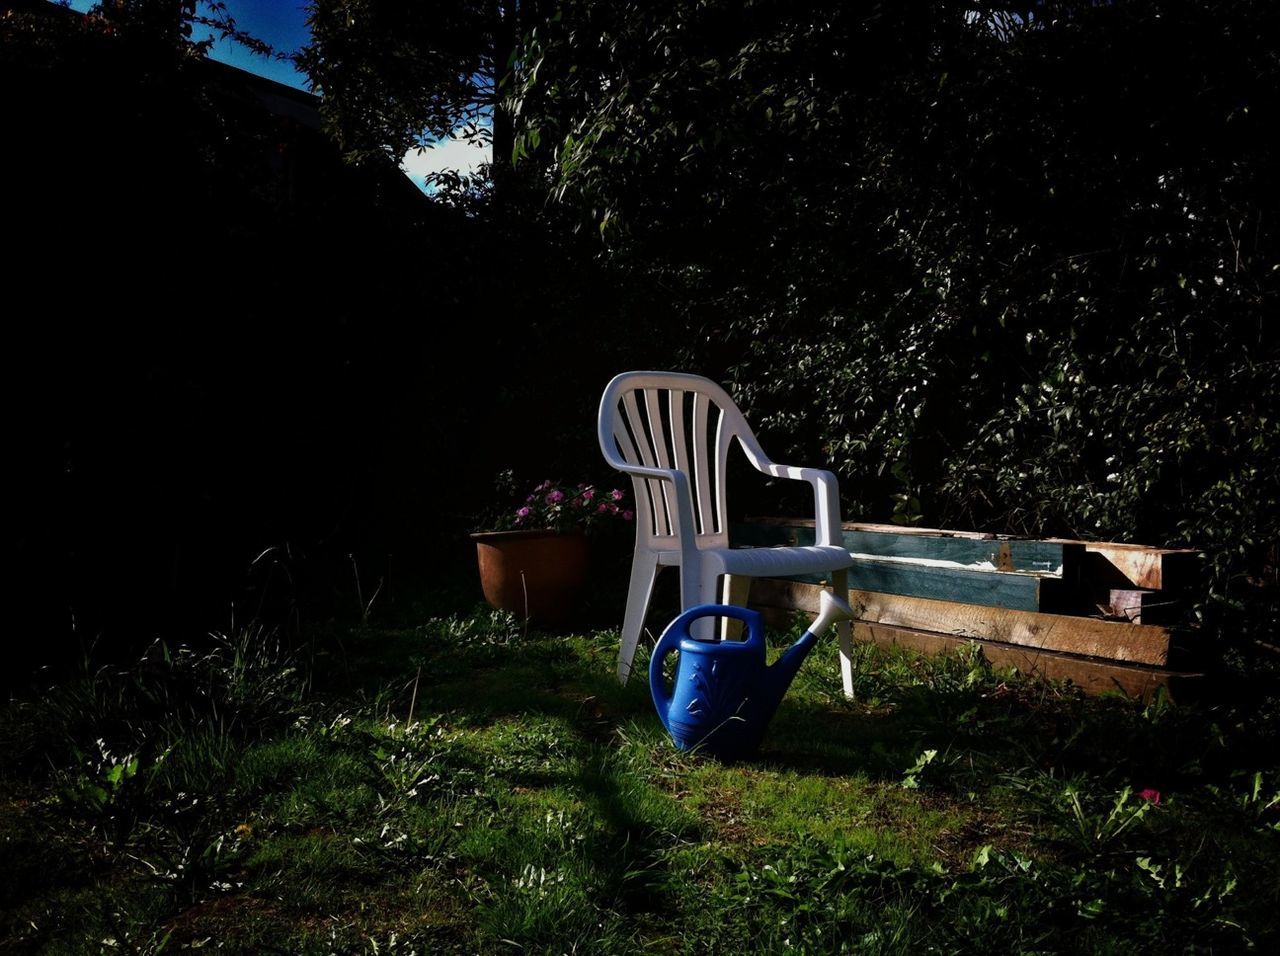 tree, abandoned, grass, chair, obsolete, absence, plant, damaged, old, bench, growth, sunlight, day, empty, front or back yard, field, relaxation, mode of transport, outdoors, transportation